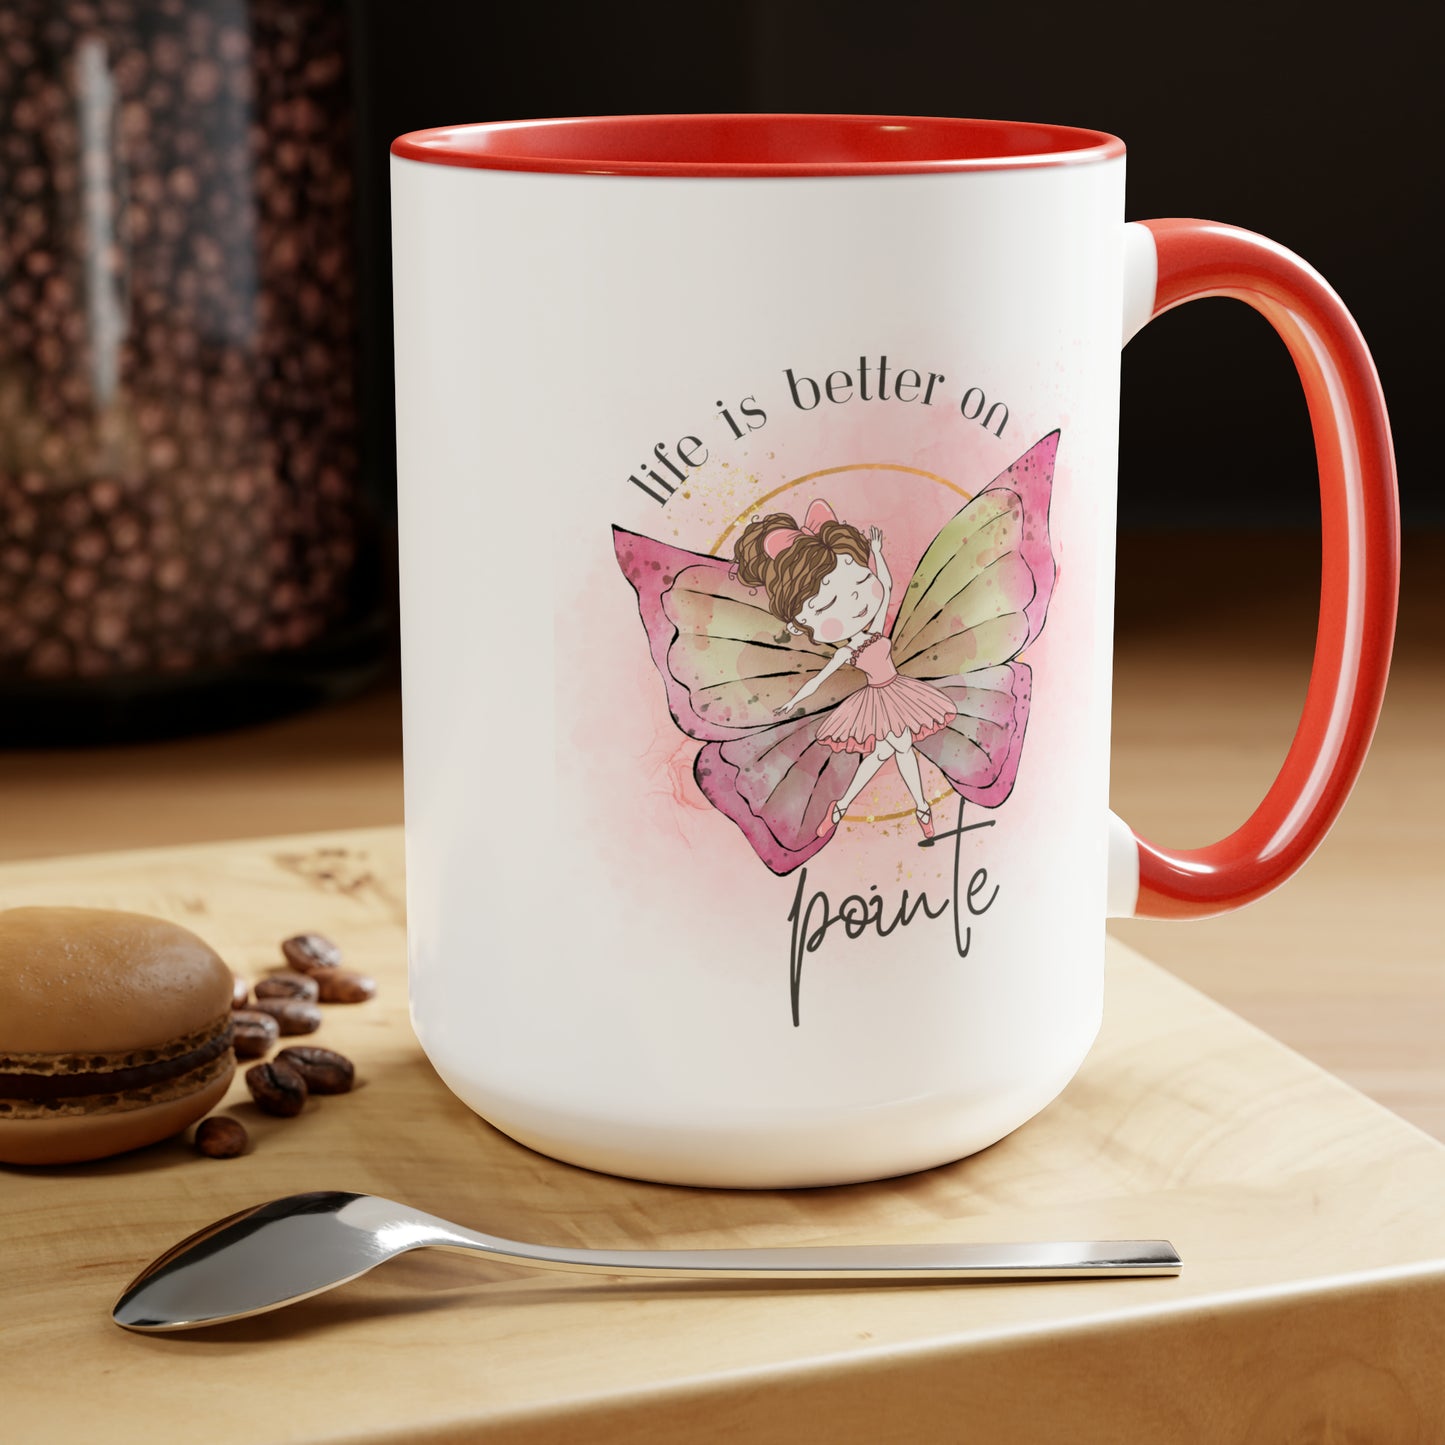 Two-Tone Coffee Mugs, 15oz - Young Ballerina with butterfly wings - red rim